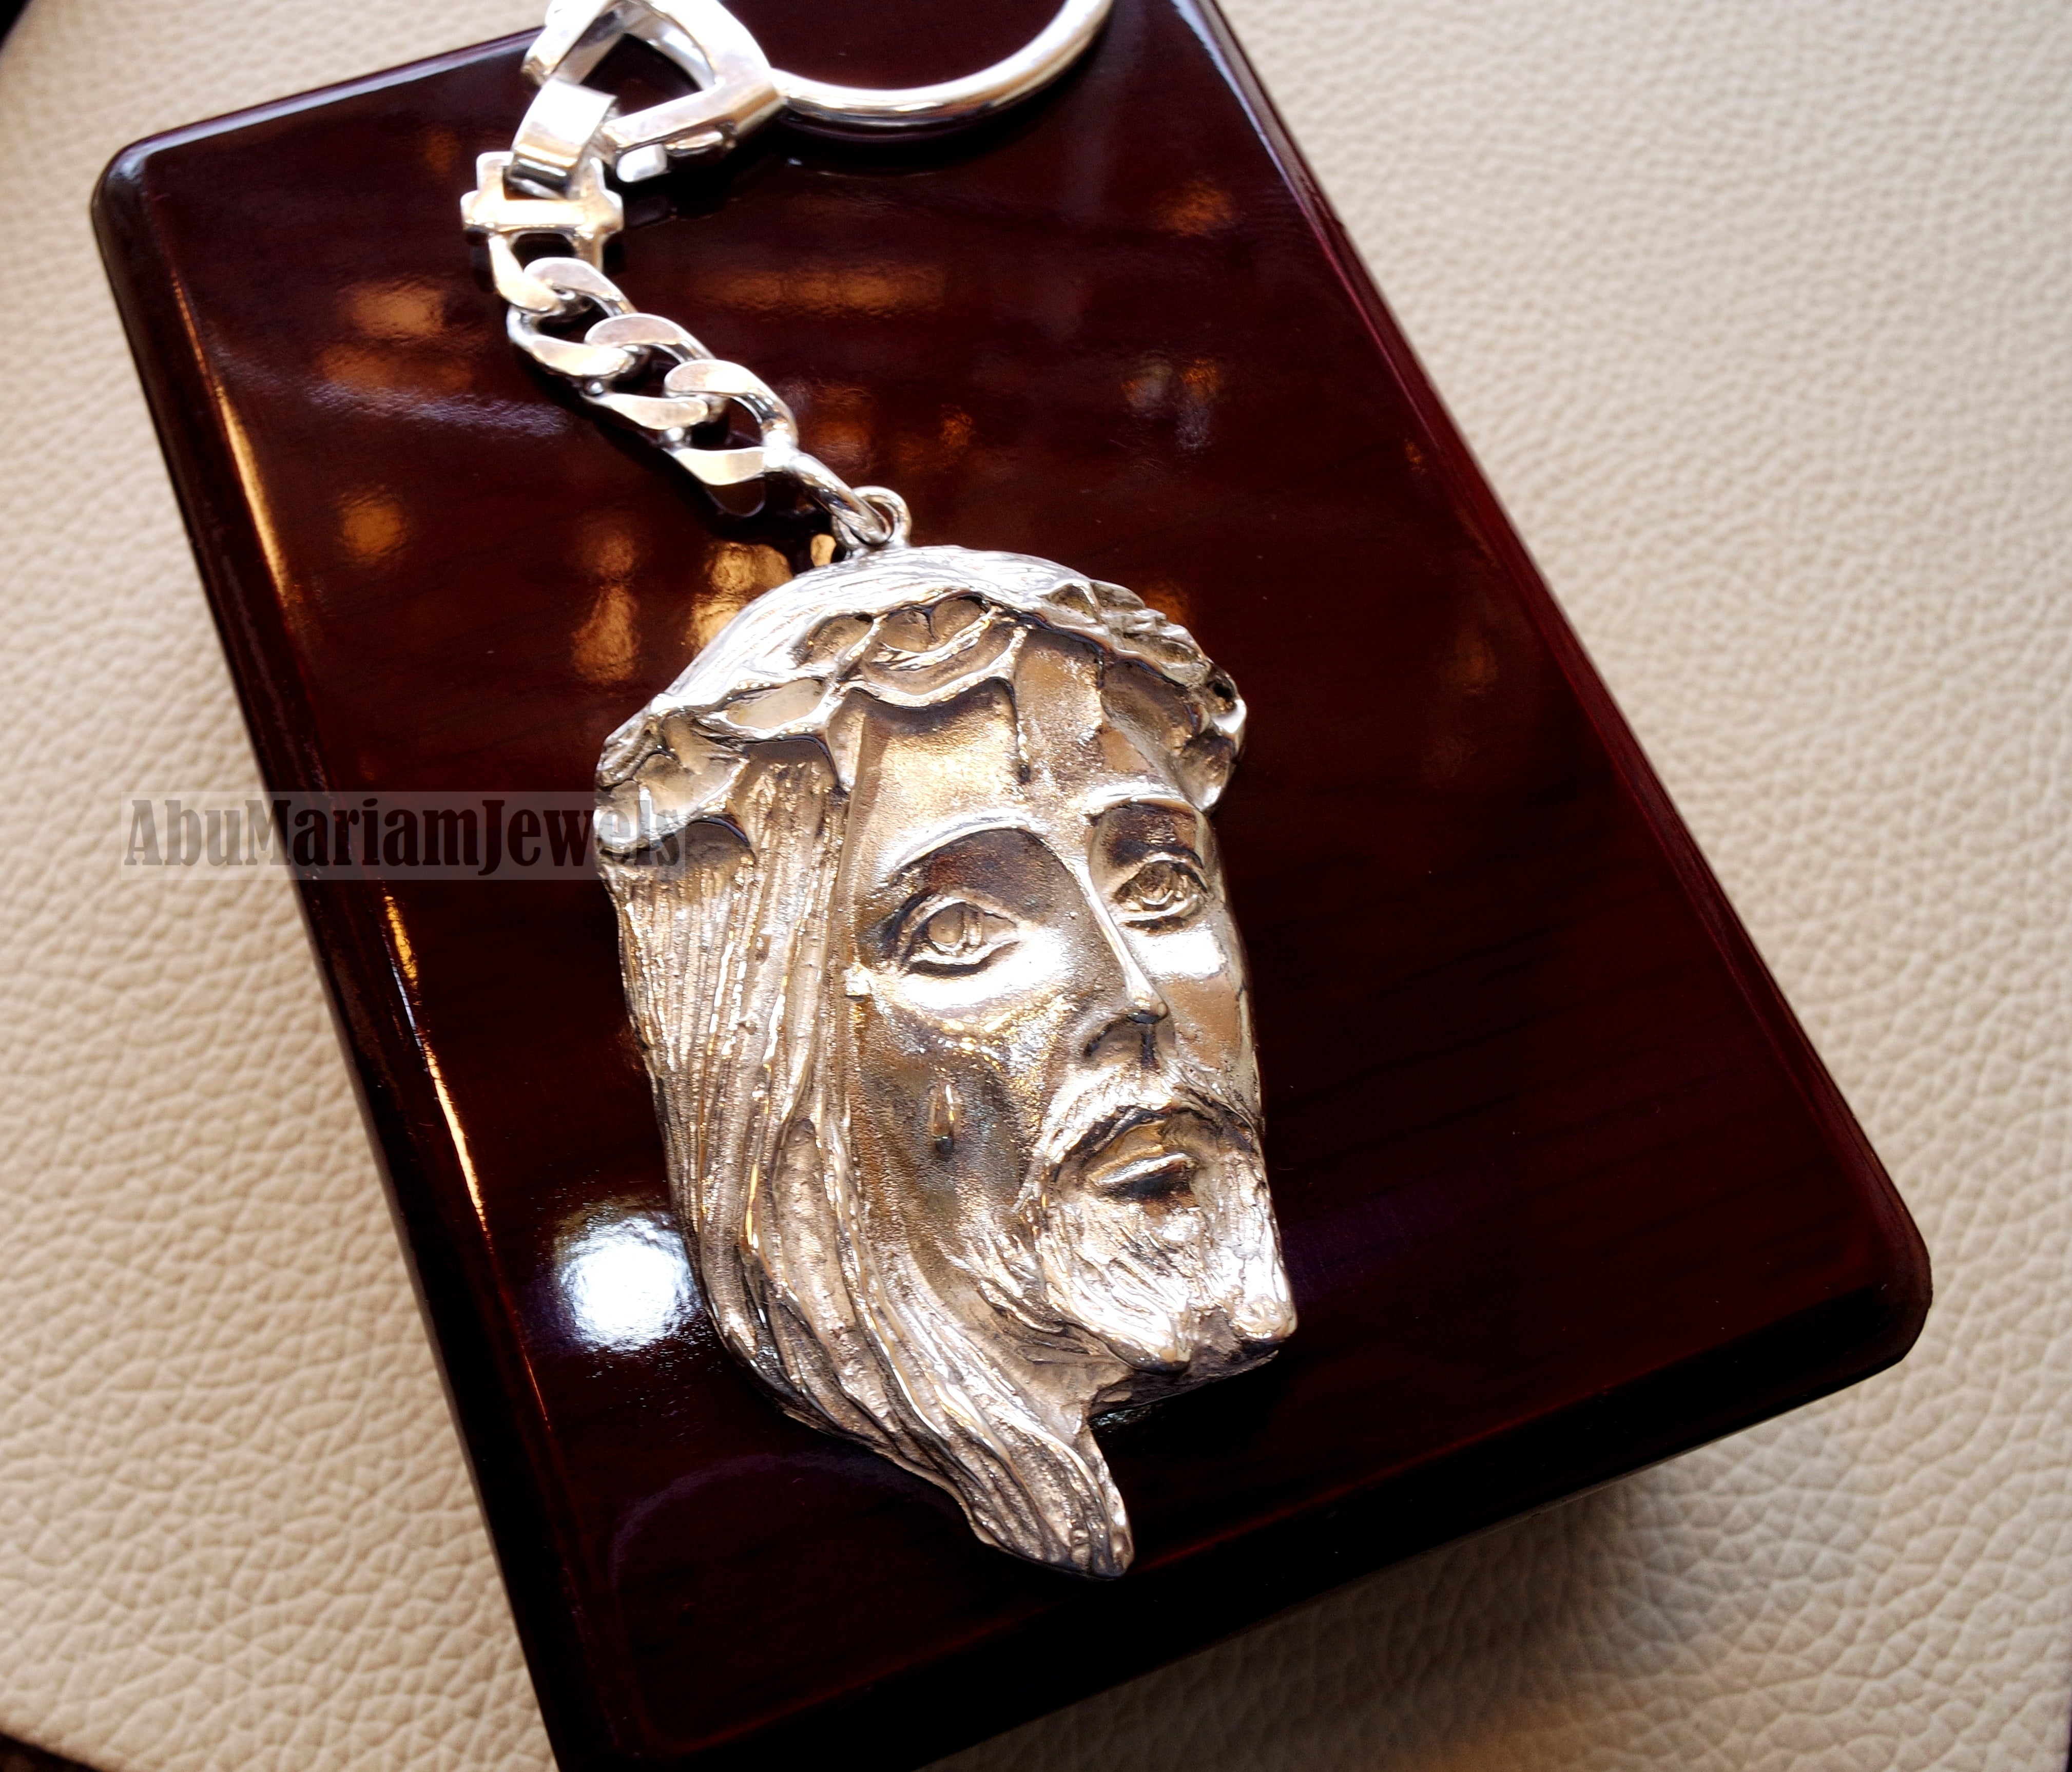 Jesus Christ face head huge pendant keychain sterling silver 925 jewelry christianity vintage handmade heavy man gift fast shipping